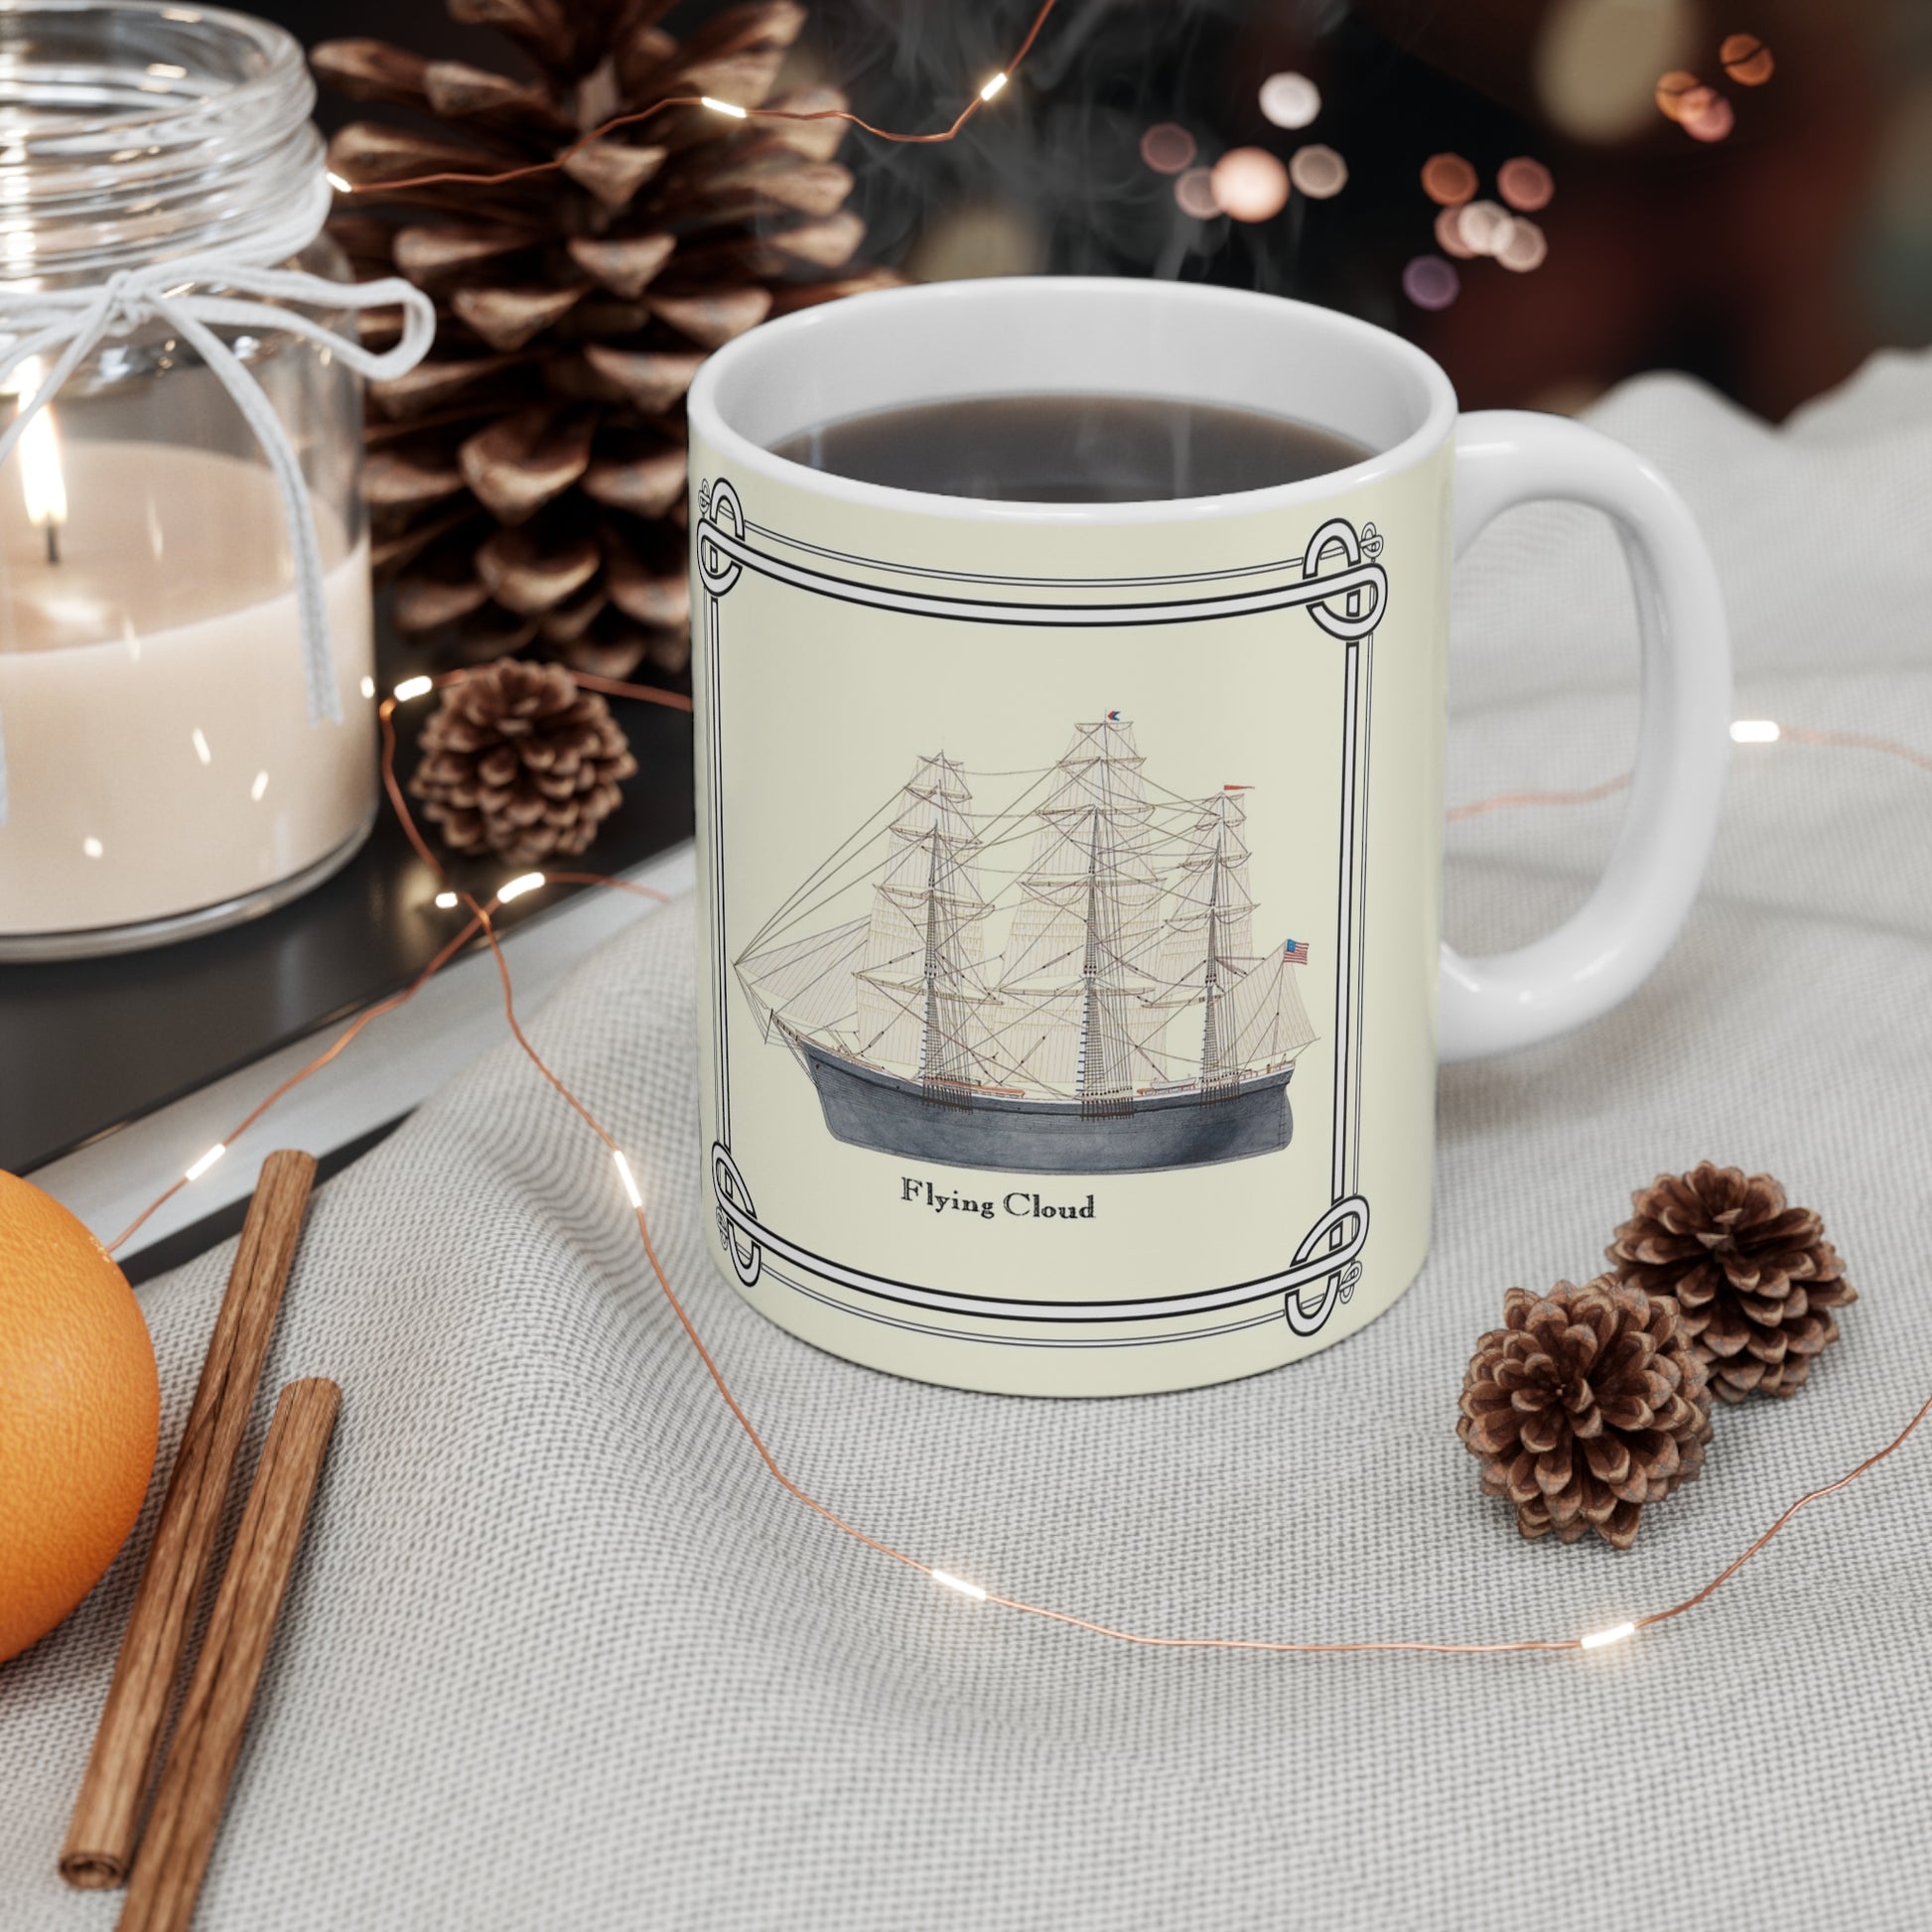 Enjoy your favorite beverage in the Clipper Flying Cloud 11 oz. mug anytime of the year. The mug makes a perfect gift for anyone who loves sailing or naval history.